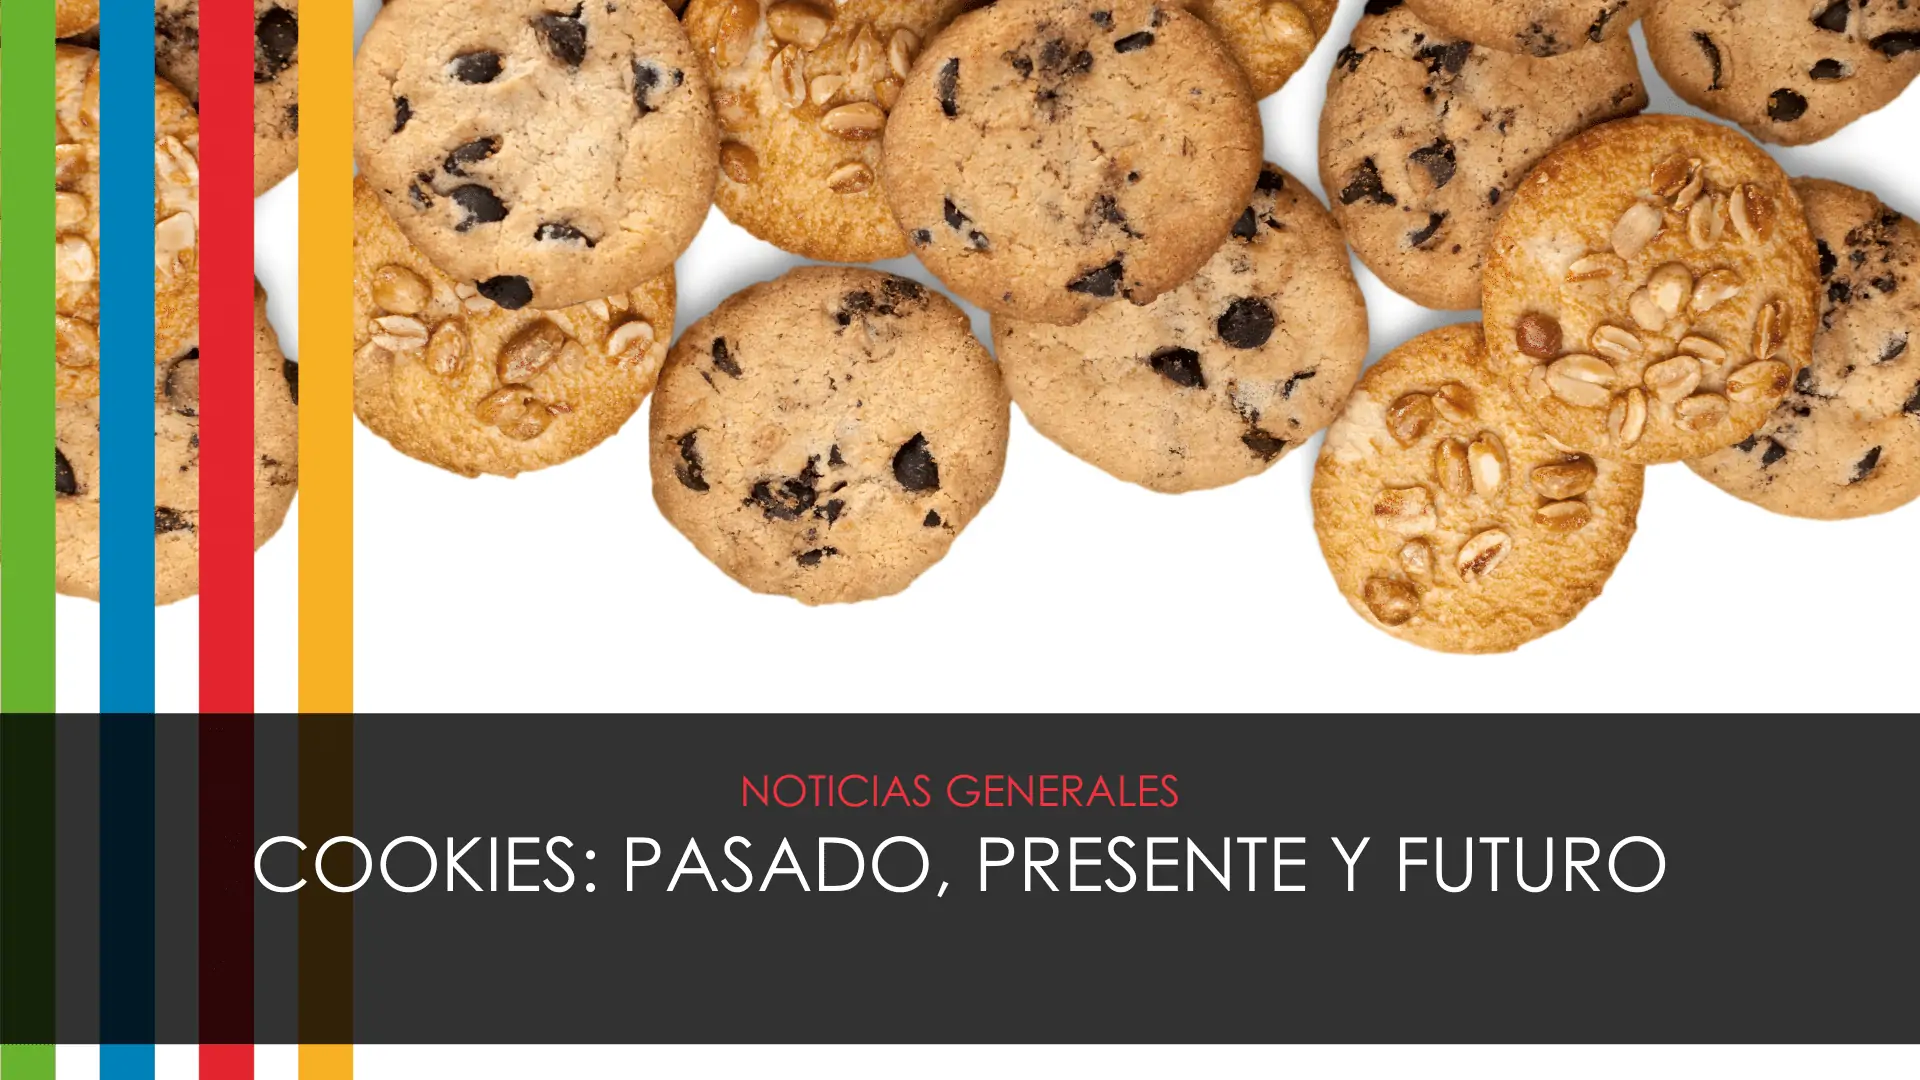 Cookies: past, present and future